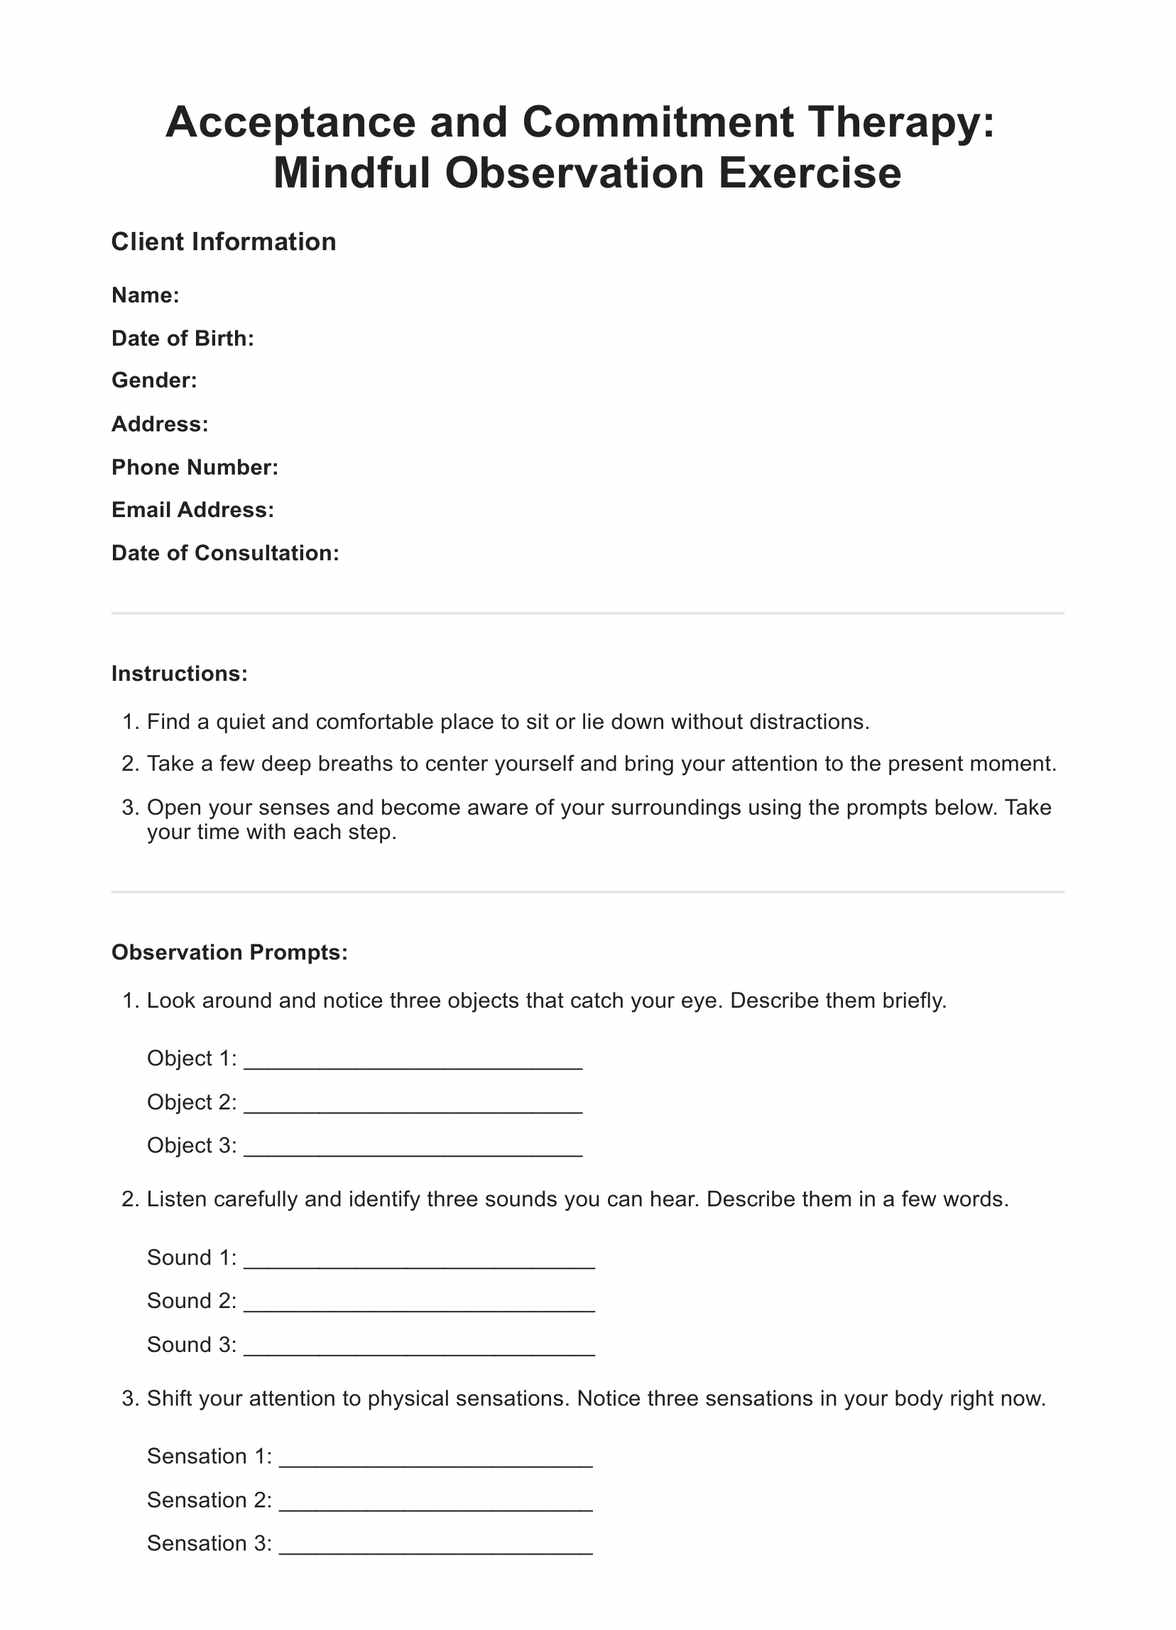 Acceptance And Commitment Therapy Worksheet PDF Example